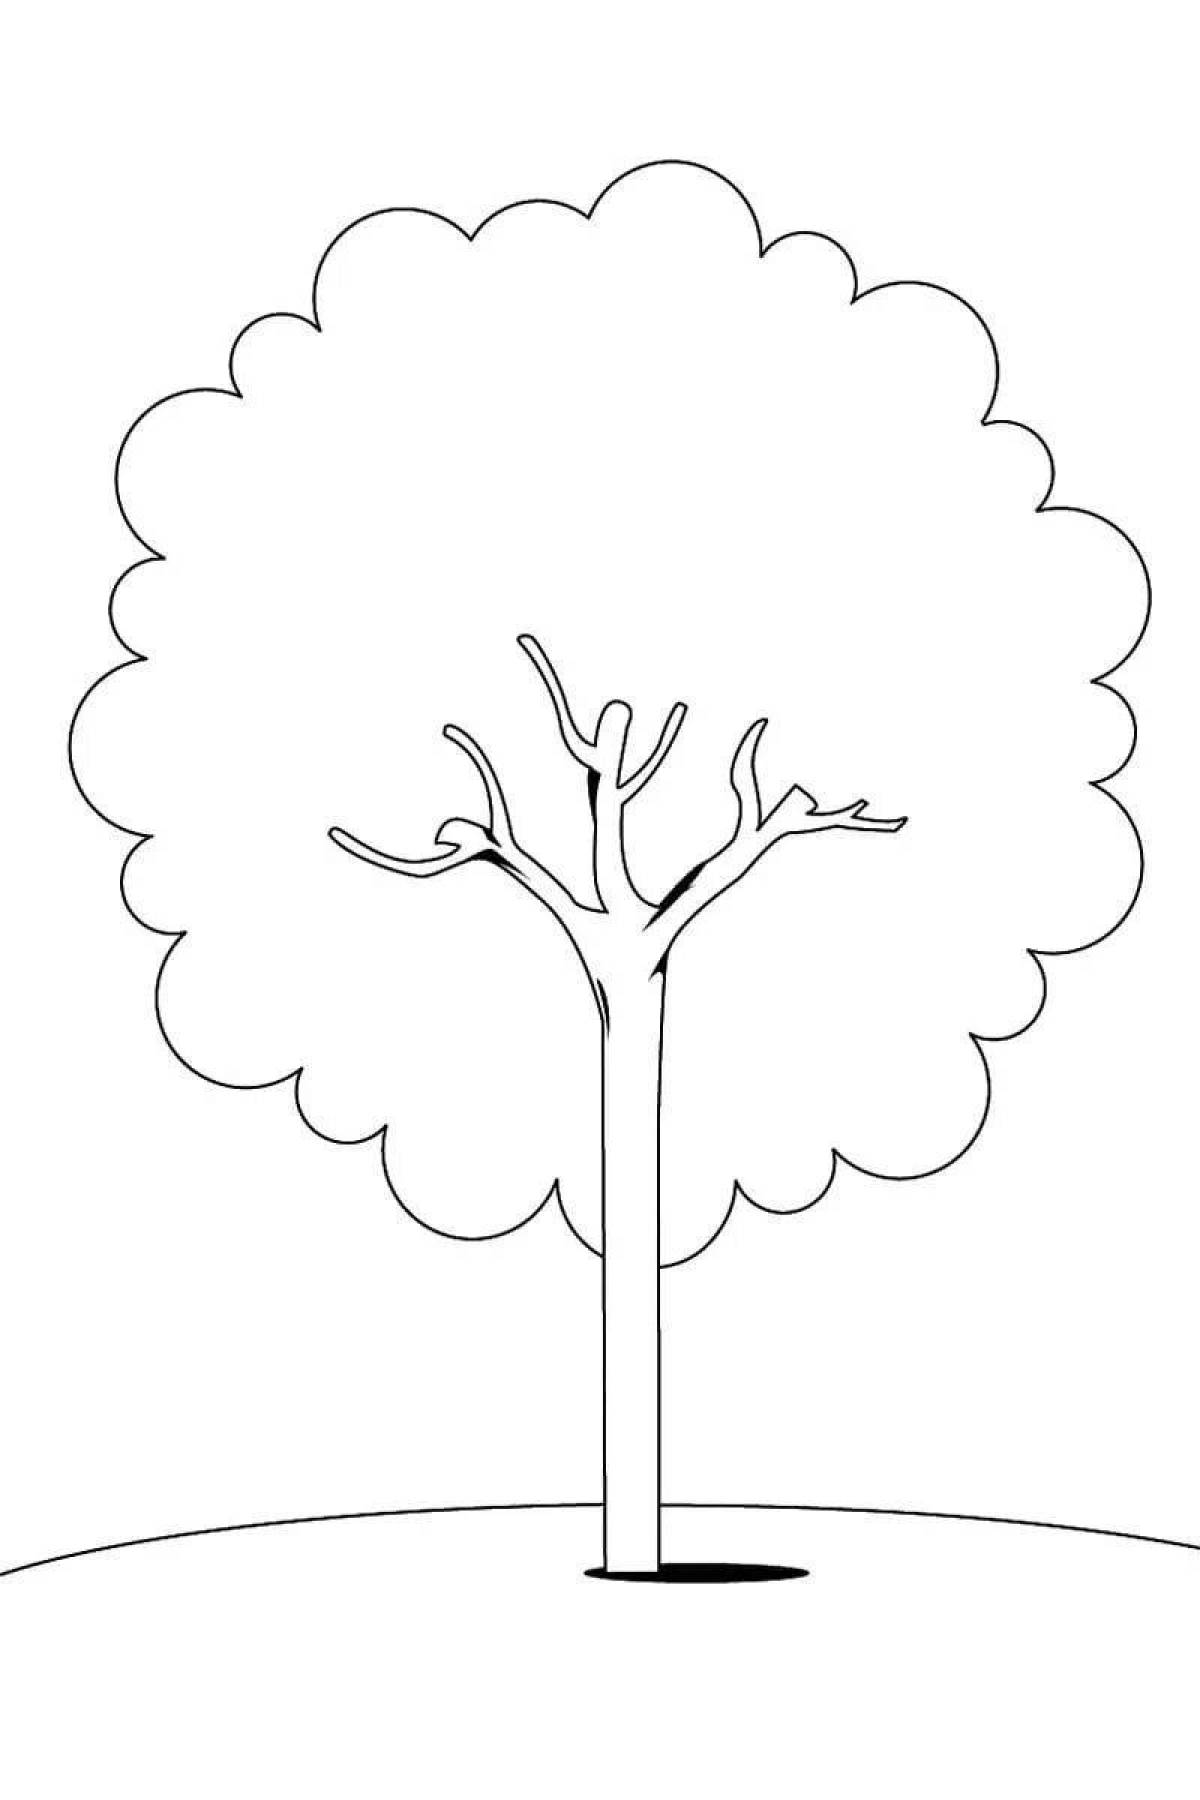 Serene pattern tree coloring page